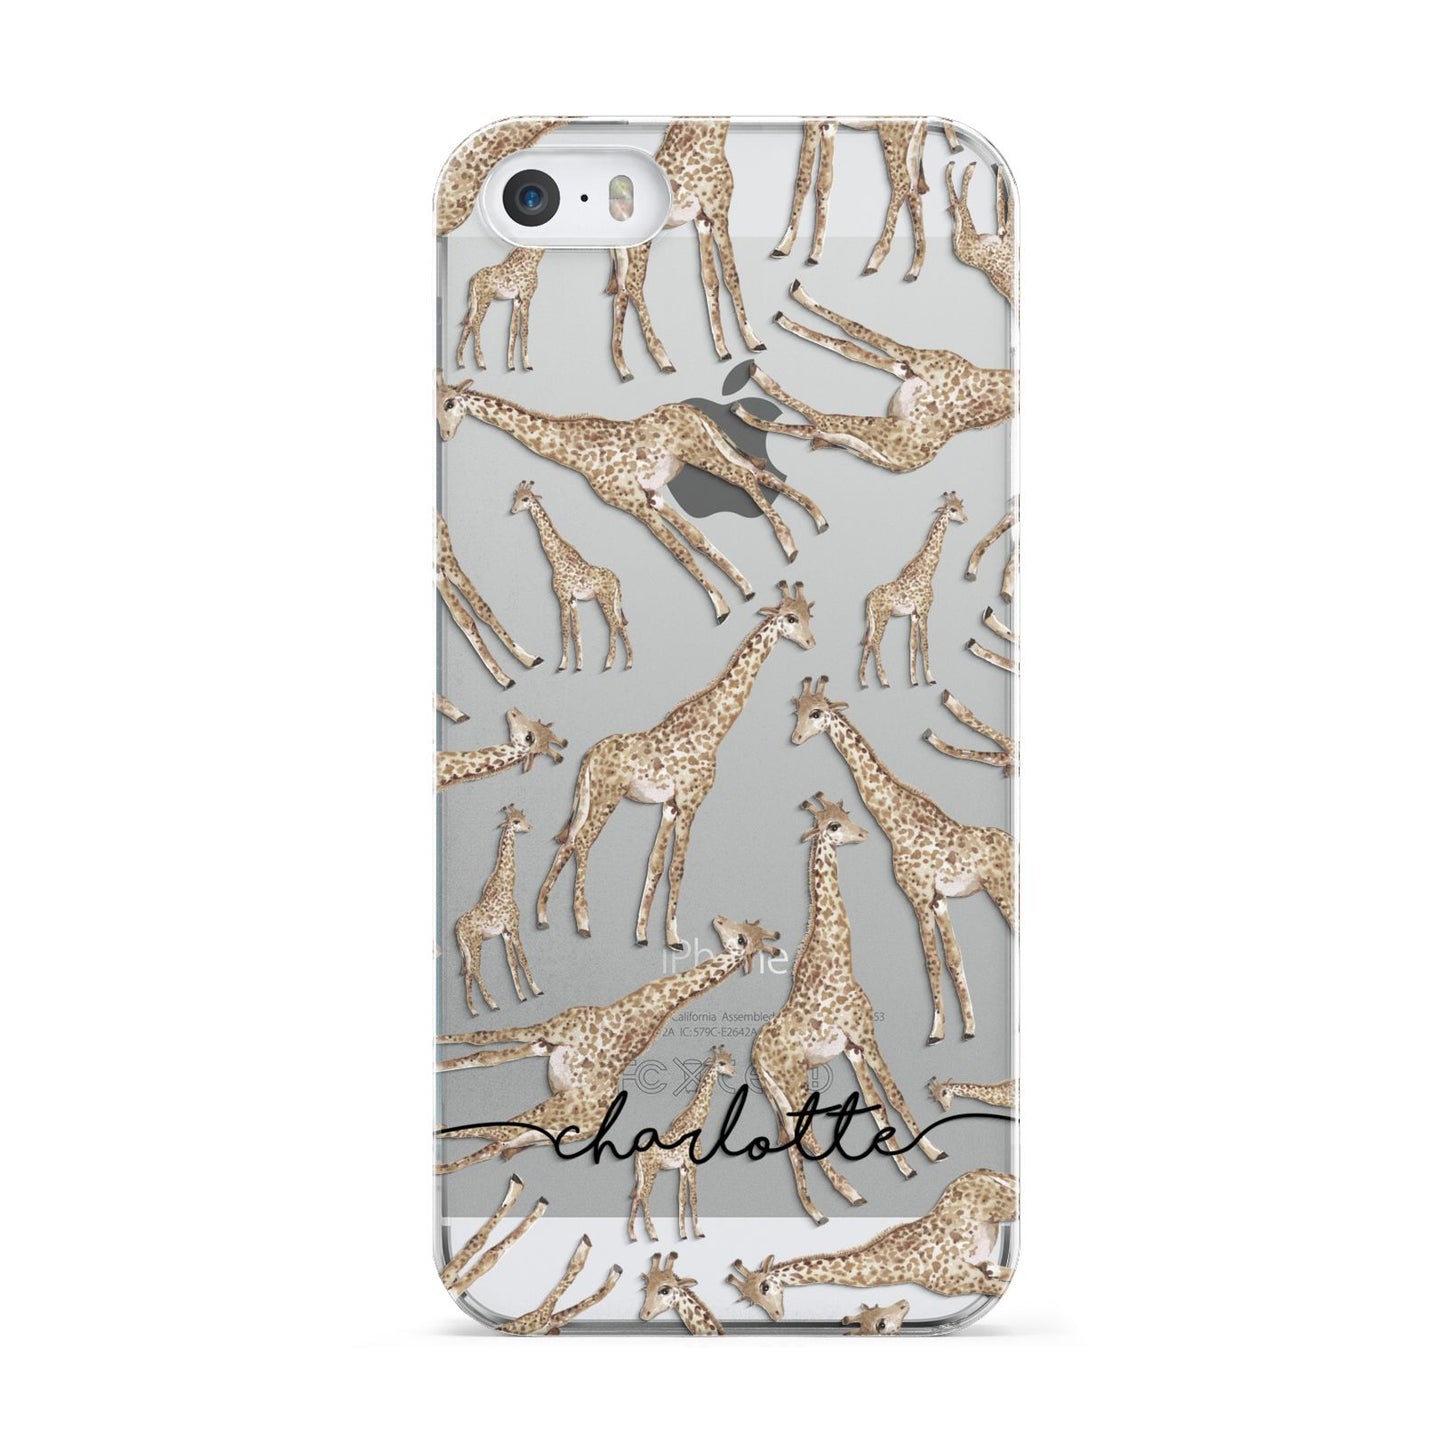 Personalised Giraffes with Name Apple iPhone 5 Case